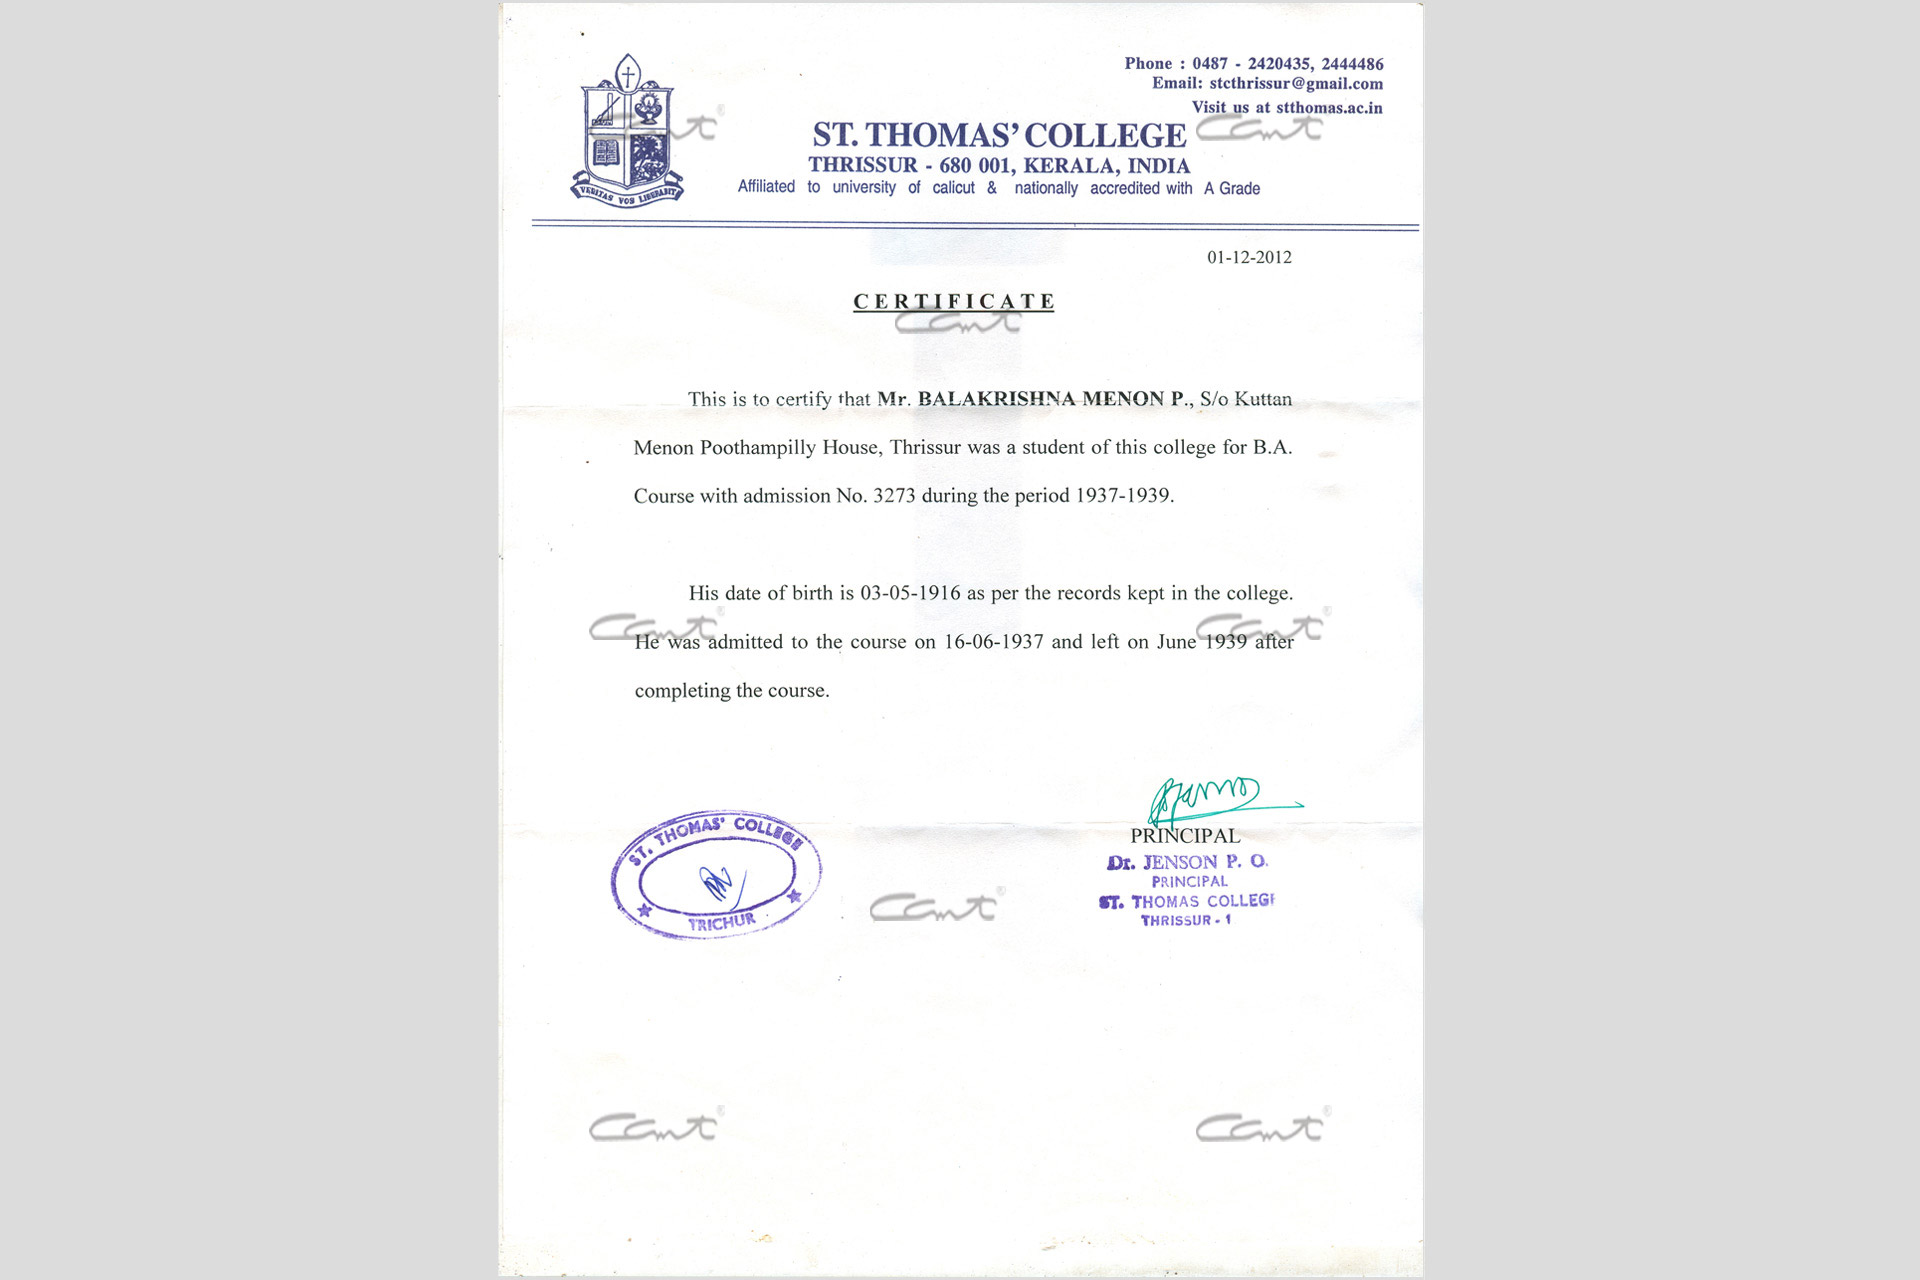 This is the certificate from St. Thomas College stating that Balakrishna Menon did his B.A there from 1937 to 1939.